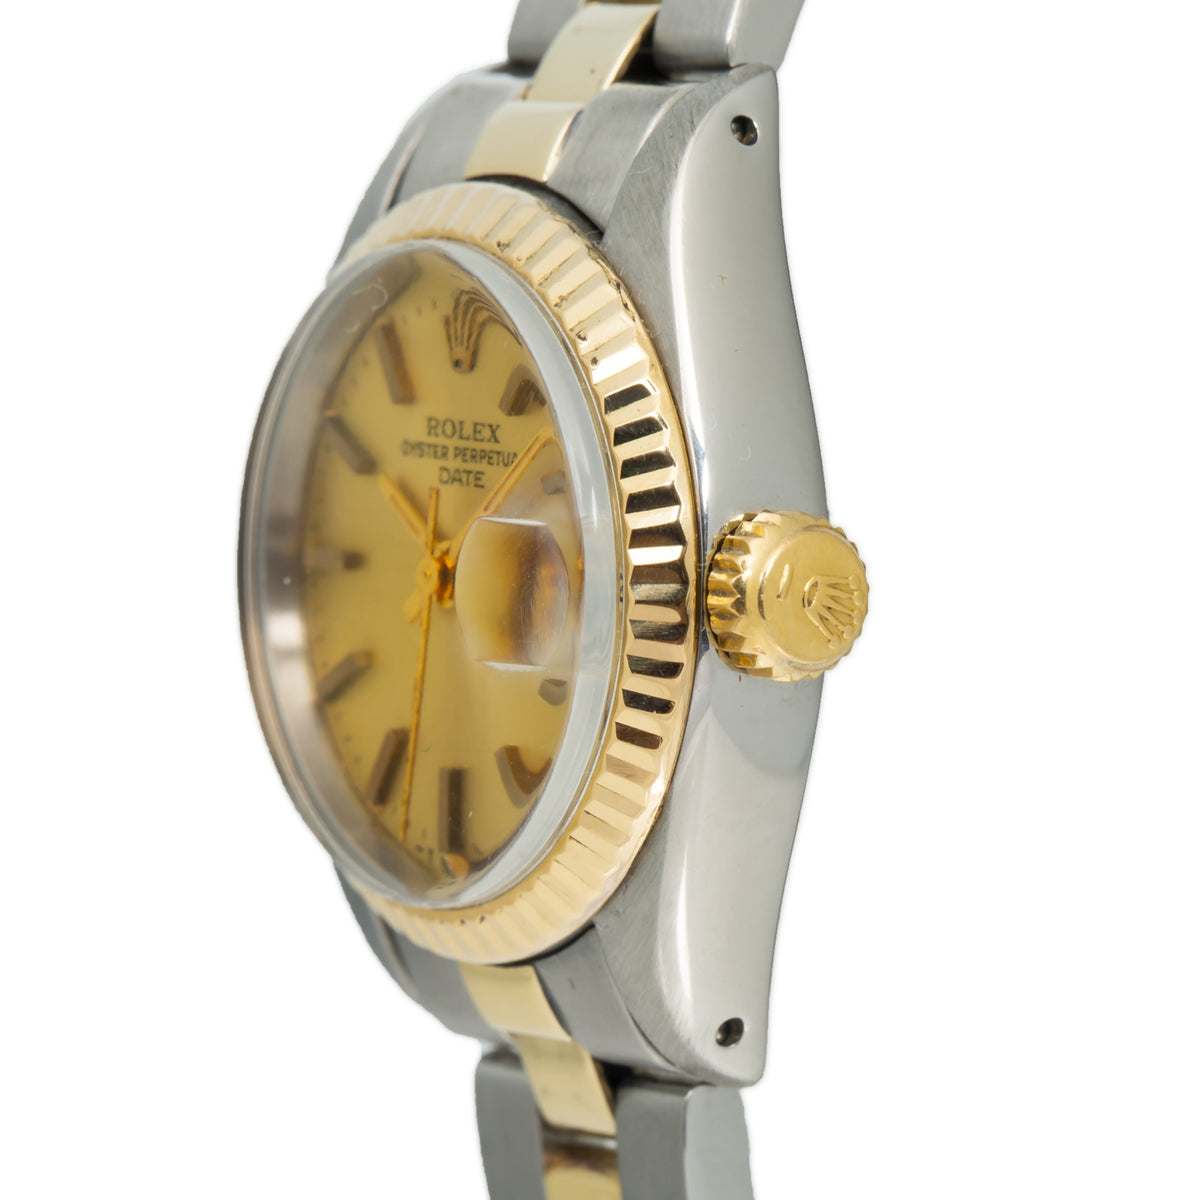 Rolex Date 6917 14k Yellow Gold TwoTone Oyster Ladie's Watch 26mm